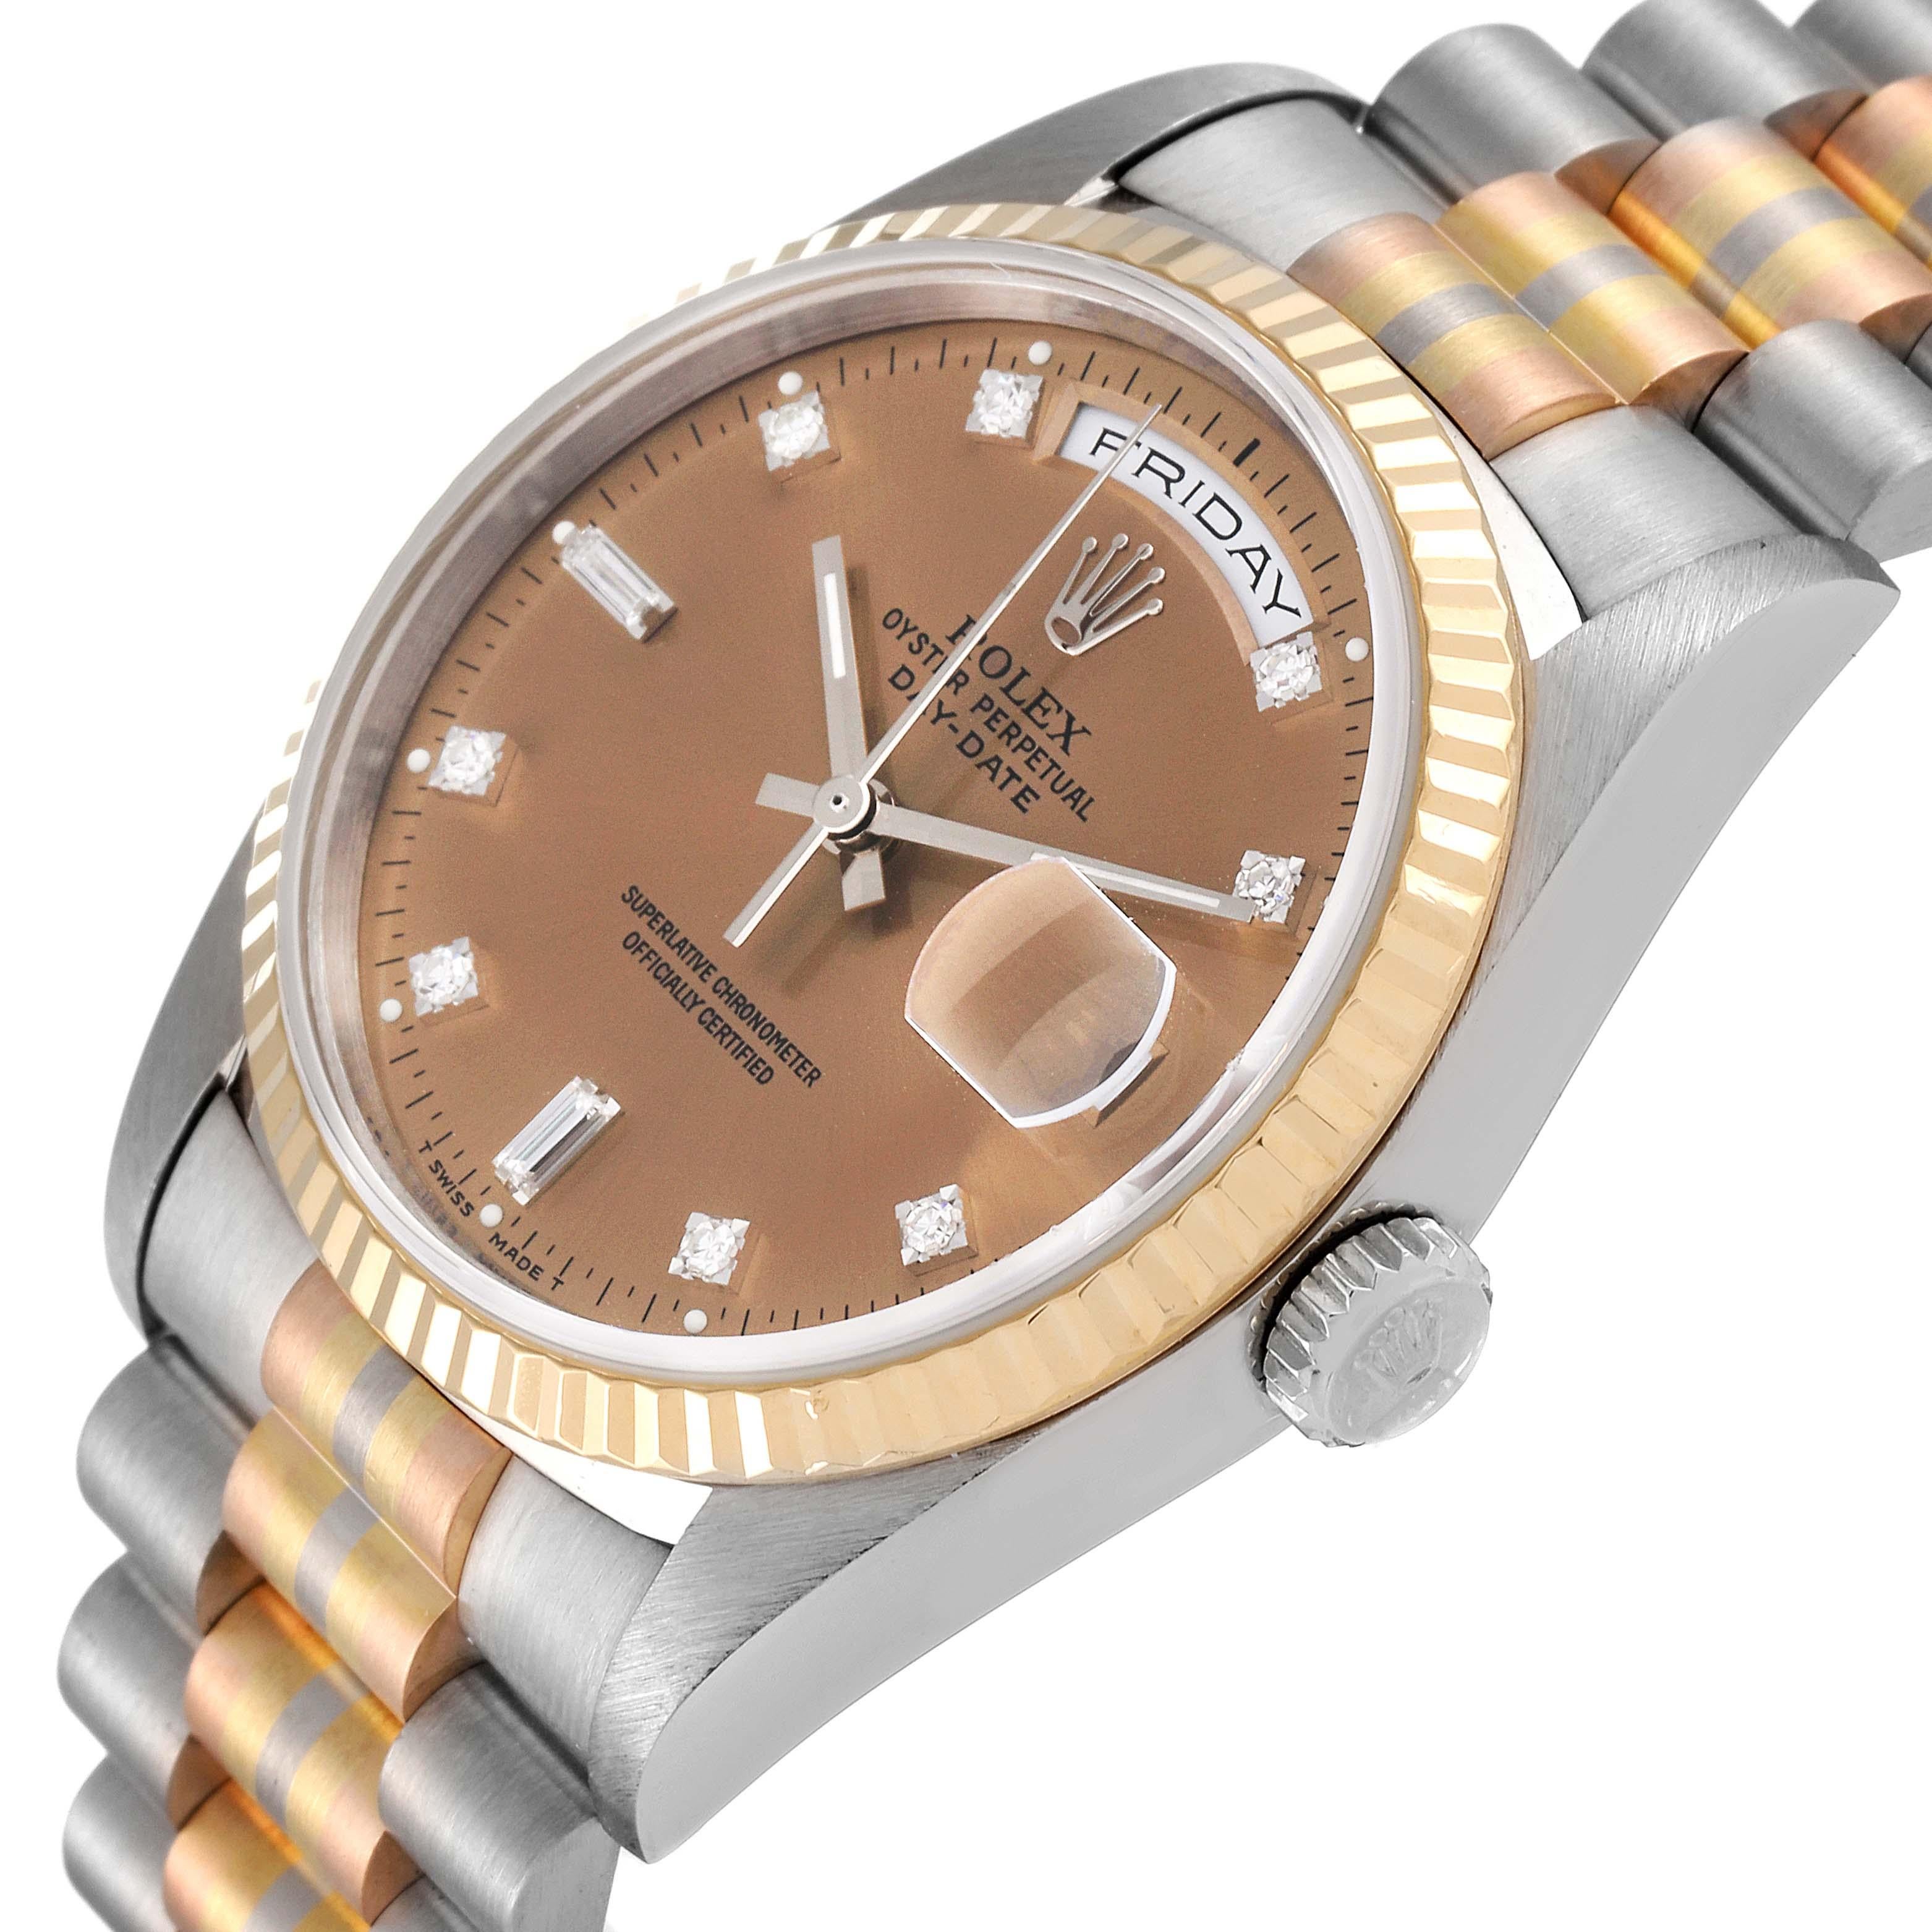 Rolex President Day-Date Tridor White Yellow Rose Gold Diamond Watch 18239 For Sale 2